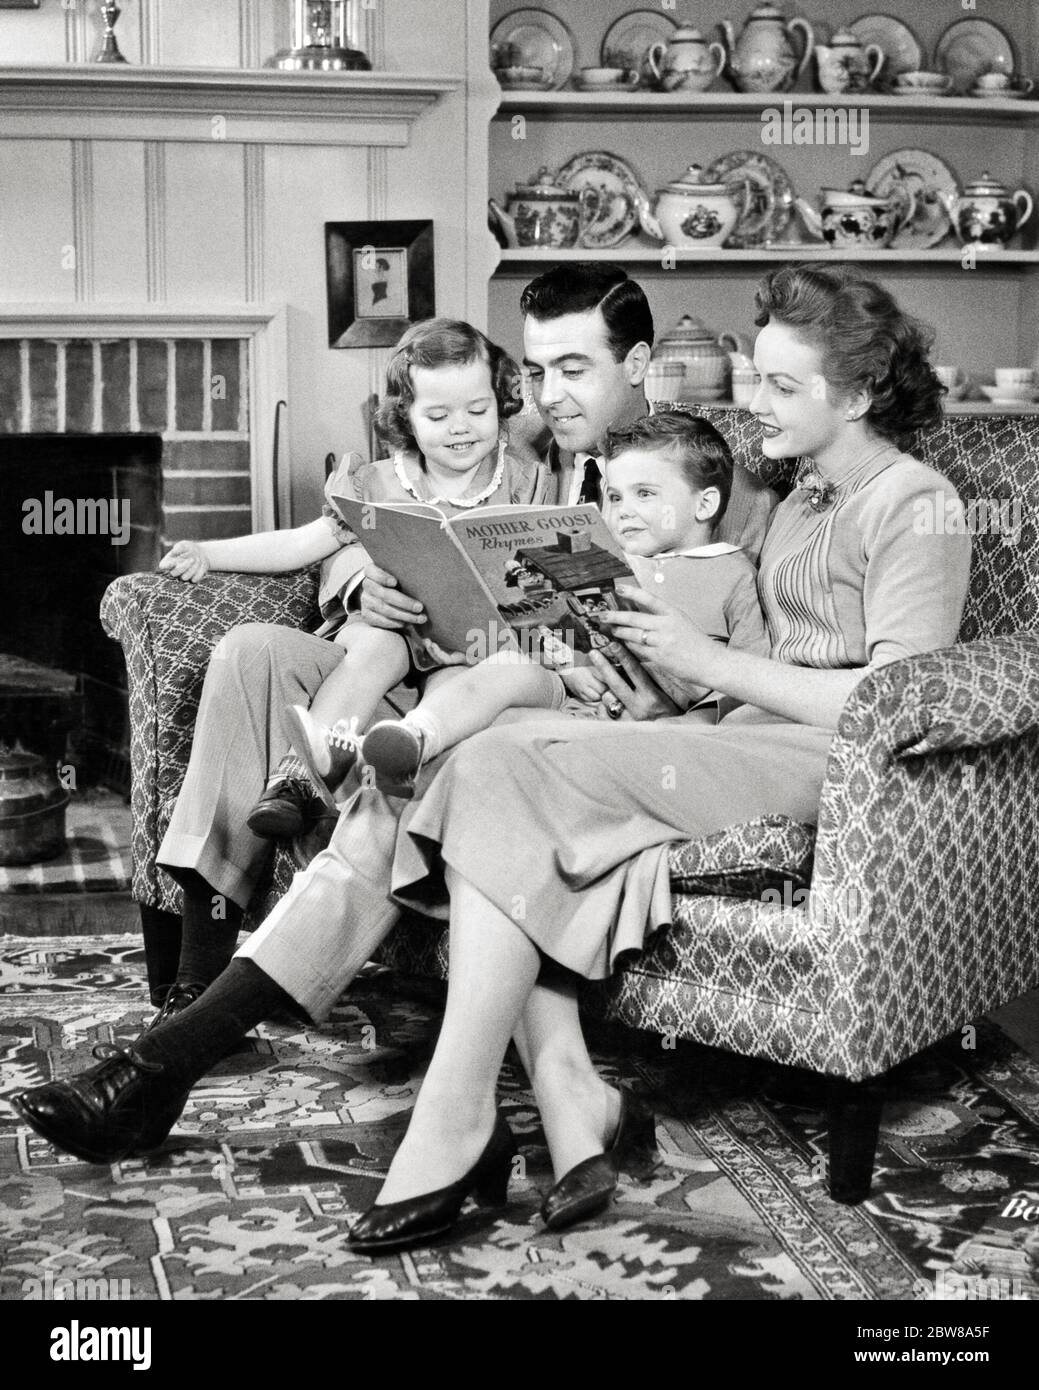 1950s FAMILY SITTING TOGETHER ON SOFA READING MOTHER GOOSE BOOK MOTHER FATHER YOUNG BOY AND GIRL - r4801 HAR001 HARS NOSTALGIA BROTHER OLD FASHION SISTER JUVENILE COMMUNICATION YOUNG ADULT SONS FAMILIES LIFESTYLE SATISFACTION FEMALES BROTHERS HEALTHINESS HOME LIFE COPY SPACE FRIENDSHIP HALF-LENGTH LADIES DAUGHTERS PERSONS INSPIRATION TRADITIONAL MALES SIBLINGS SISTERS FATHERS B&W HAPPINESS AND DADS SIBLING CONNECTION CONCEPTUAL STYLISH MIDDLE CLASS BABY BOY MOTHER GOOSE COOPERATION JUVENILES MOMS TOGETHERNESS YOUNG ADULT MAN YOUNG ADULT WOMAN BLACK AND WHITE CAUCASIAN ETHNICITY HAR001 Stock Photo